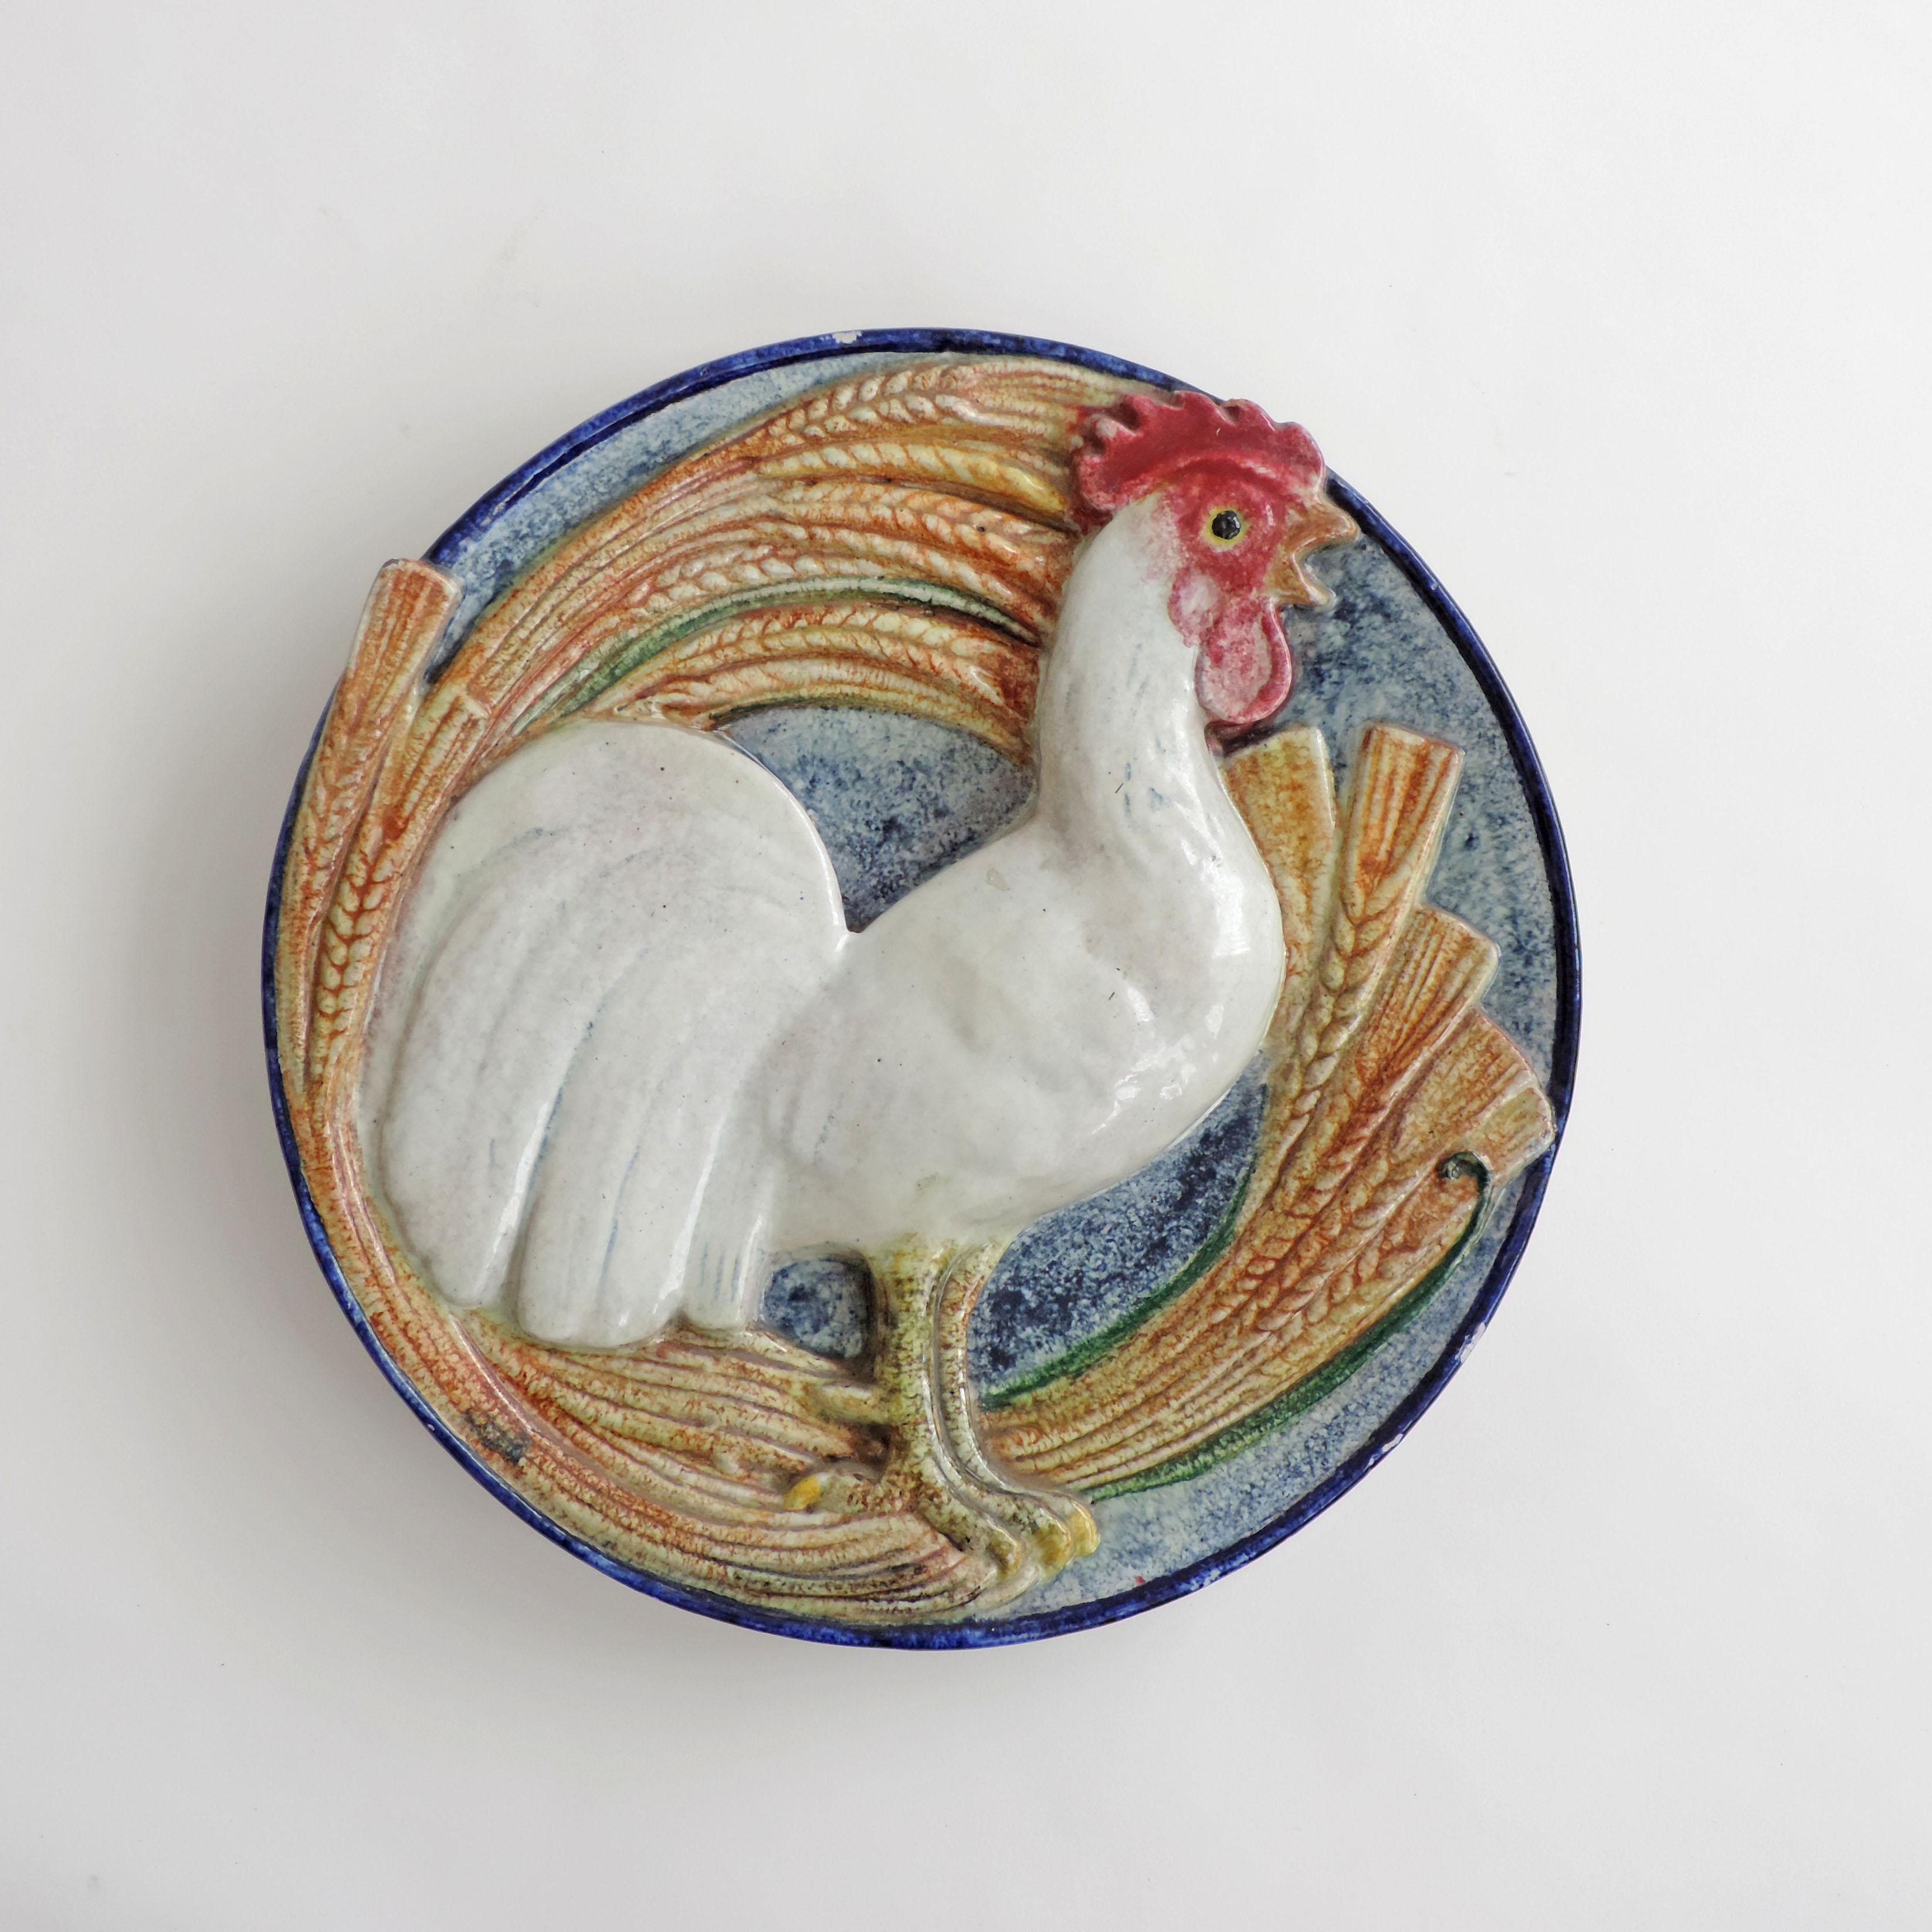 Monumental ceramic wall plate with a chicken 
Signed A.R.